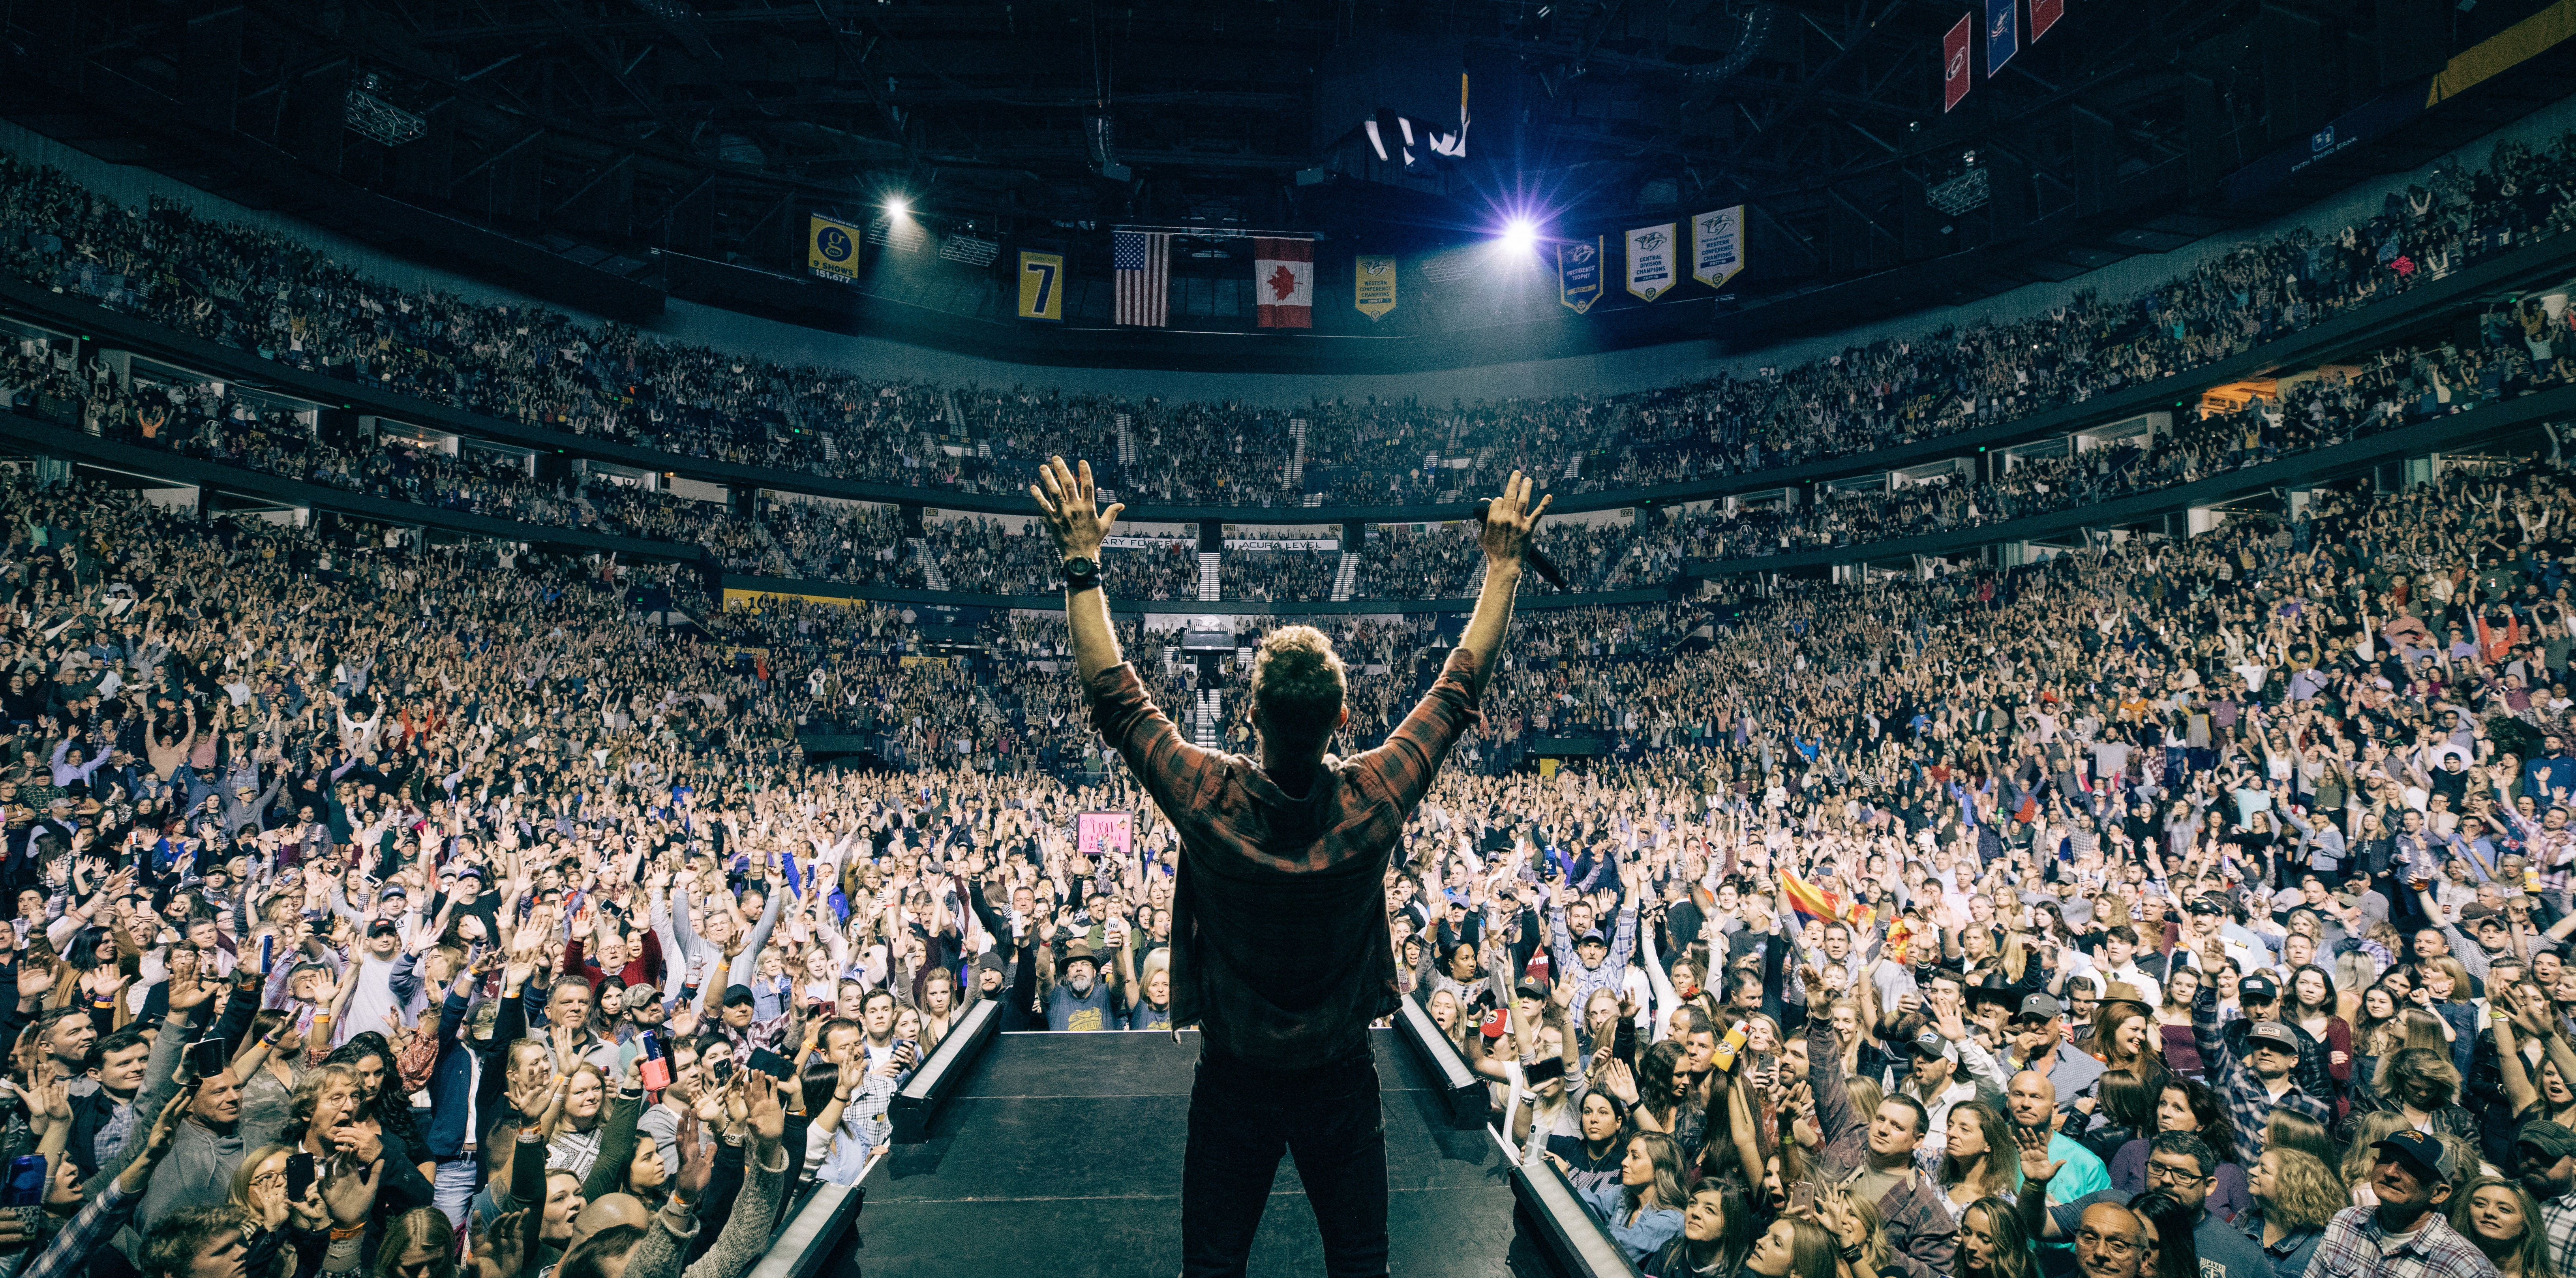 Pressroom DIERKS BENTLEY “LEFT IT ALL ON STAGE” DURING HIS SOLDOUT